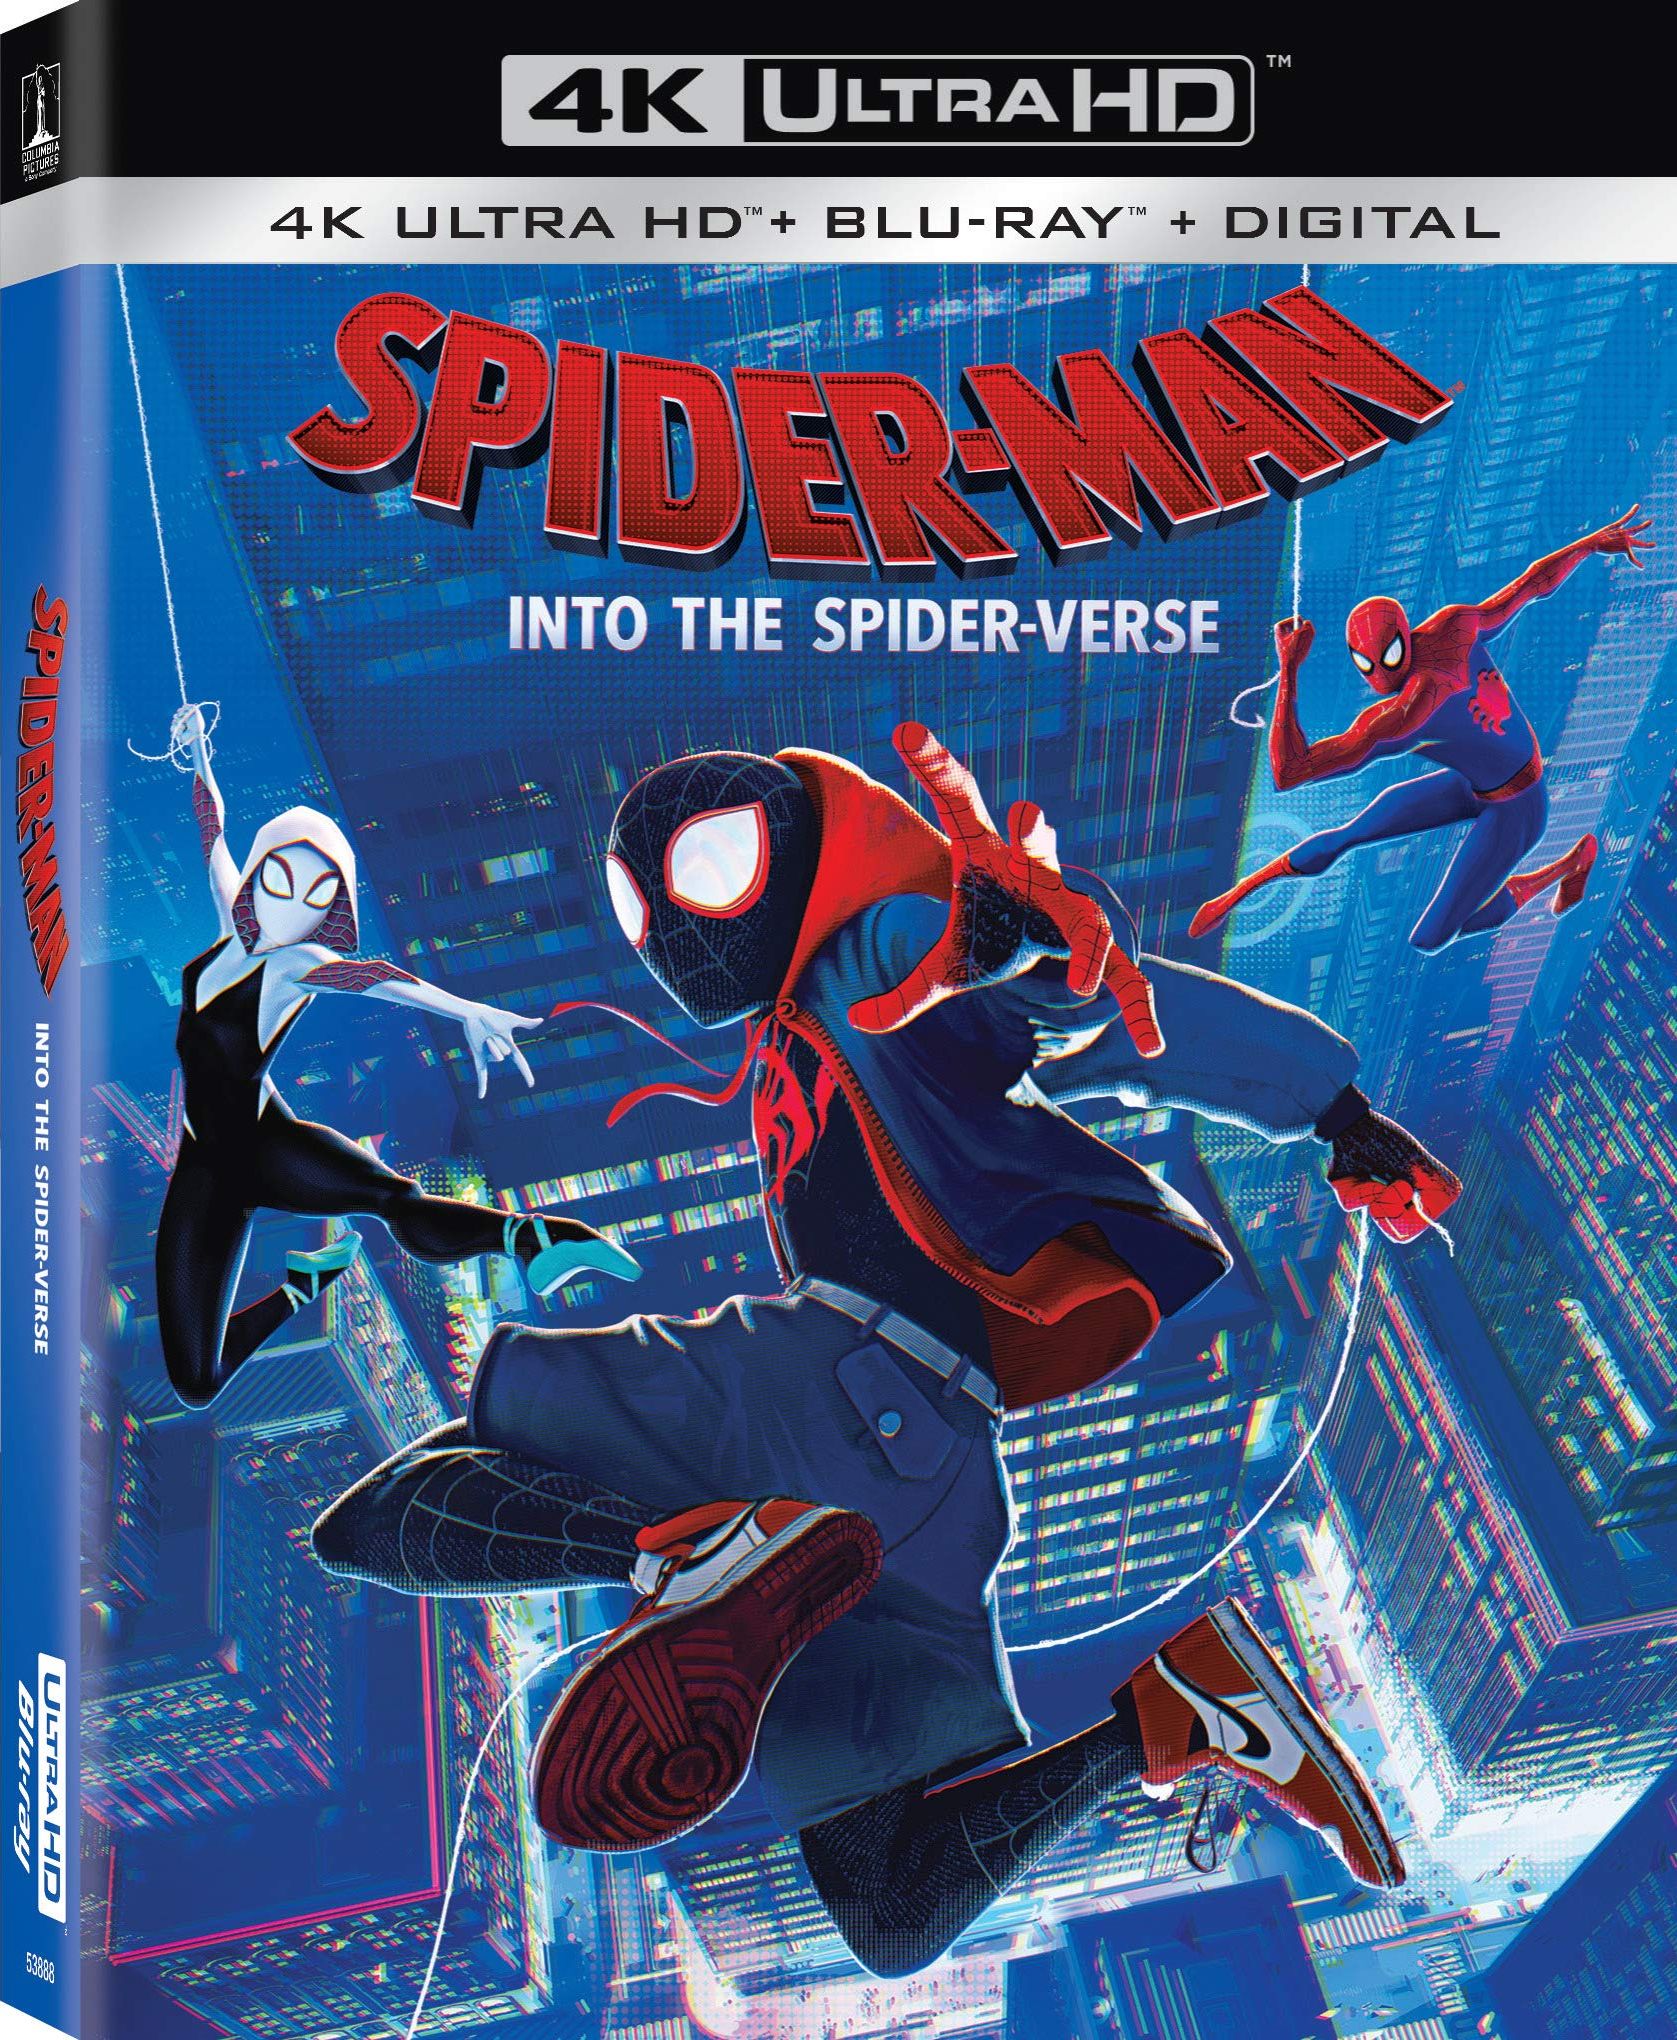 Spider-Man: Into the Spider-Verse DVD Release Date March 19, 2019